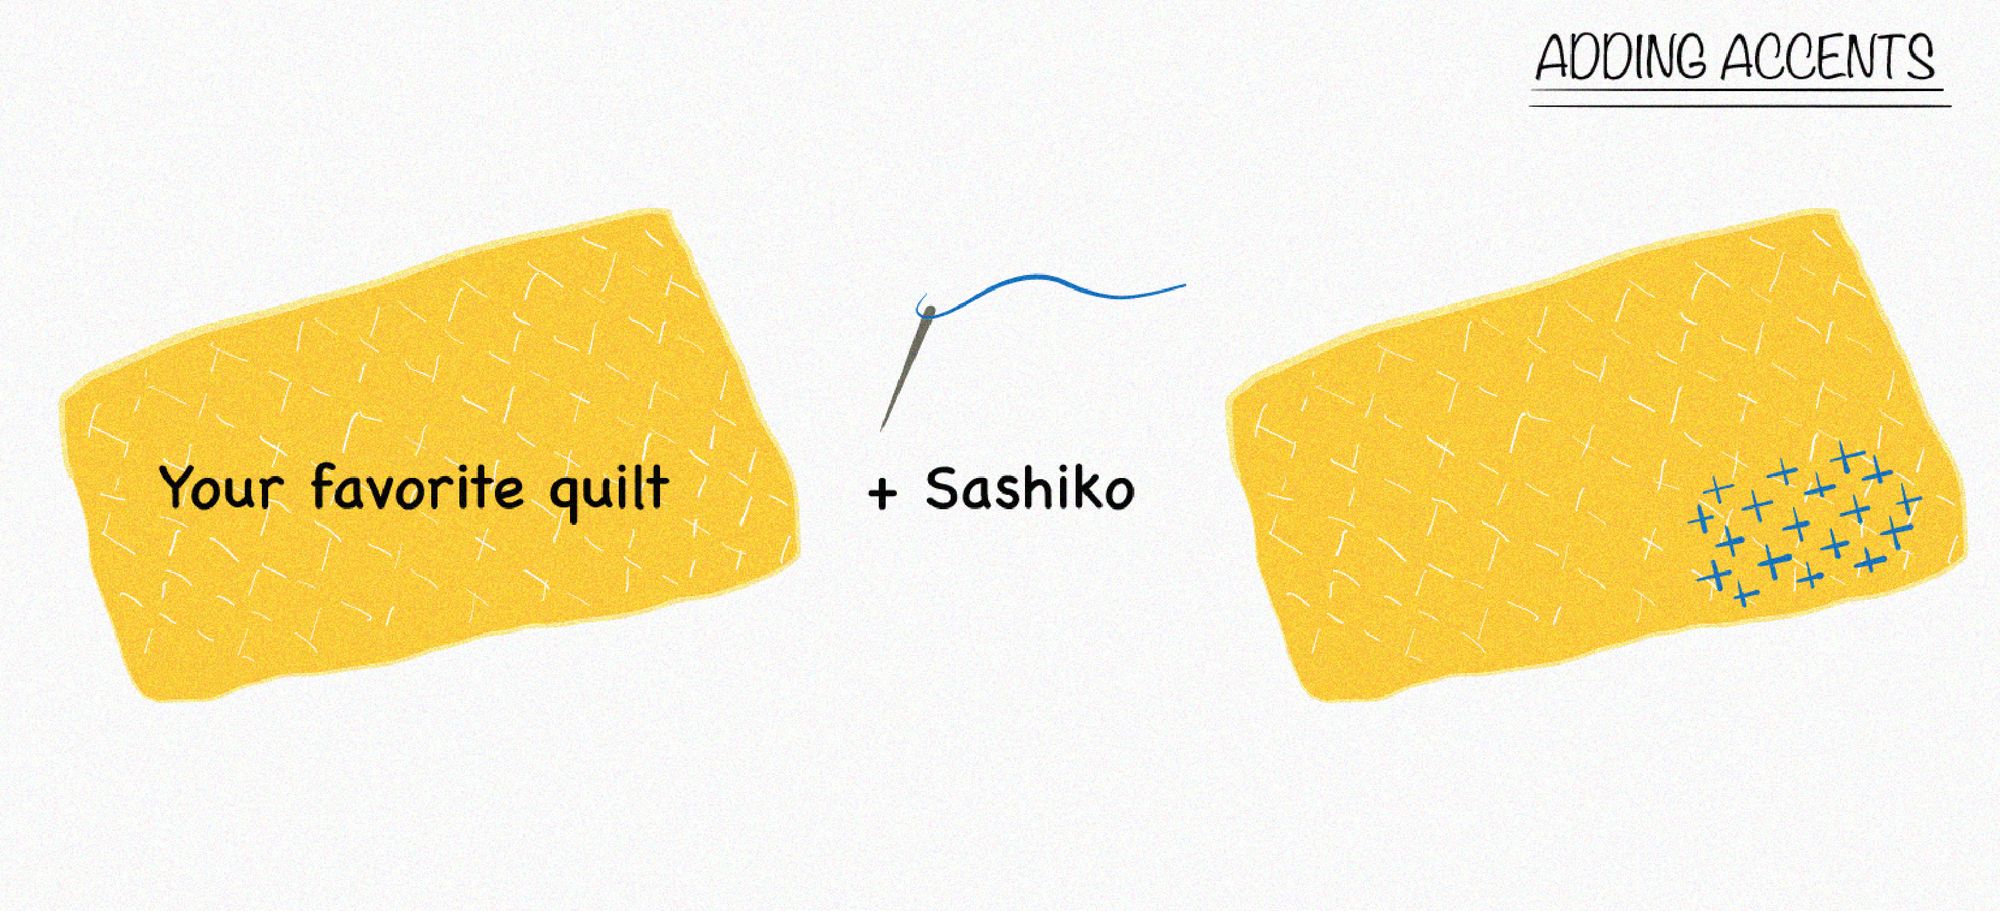 Instructions on how to add sashiko to your quilt